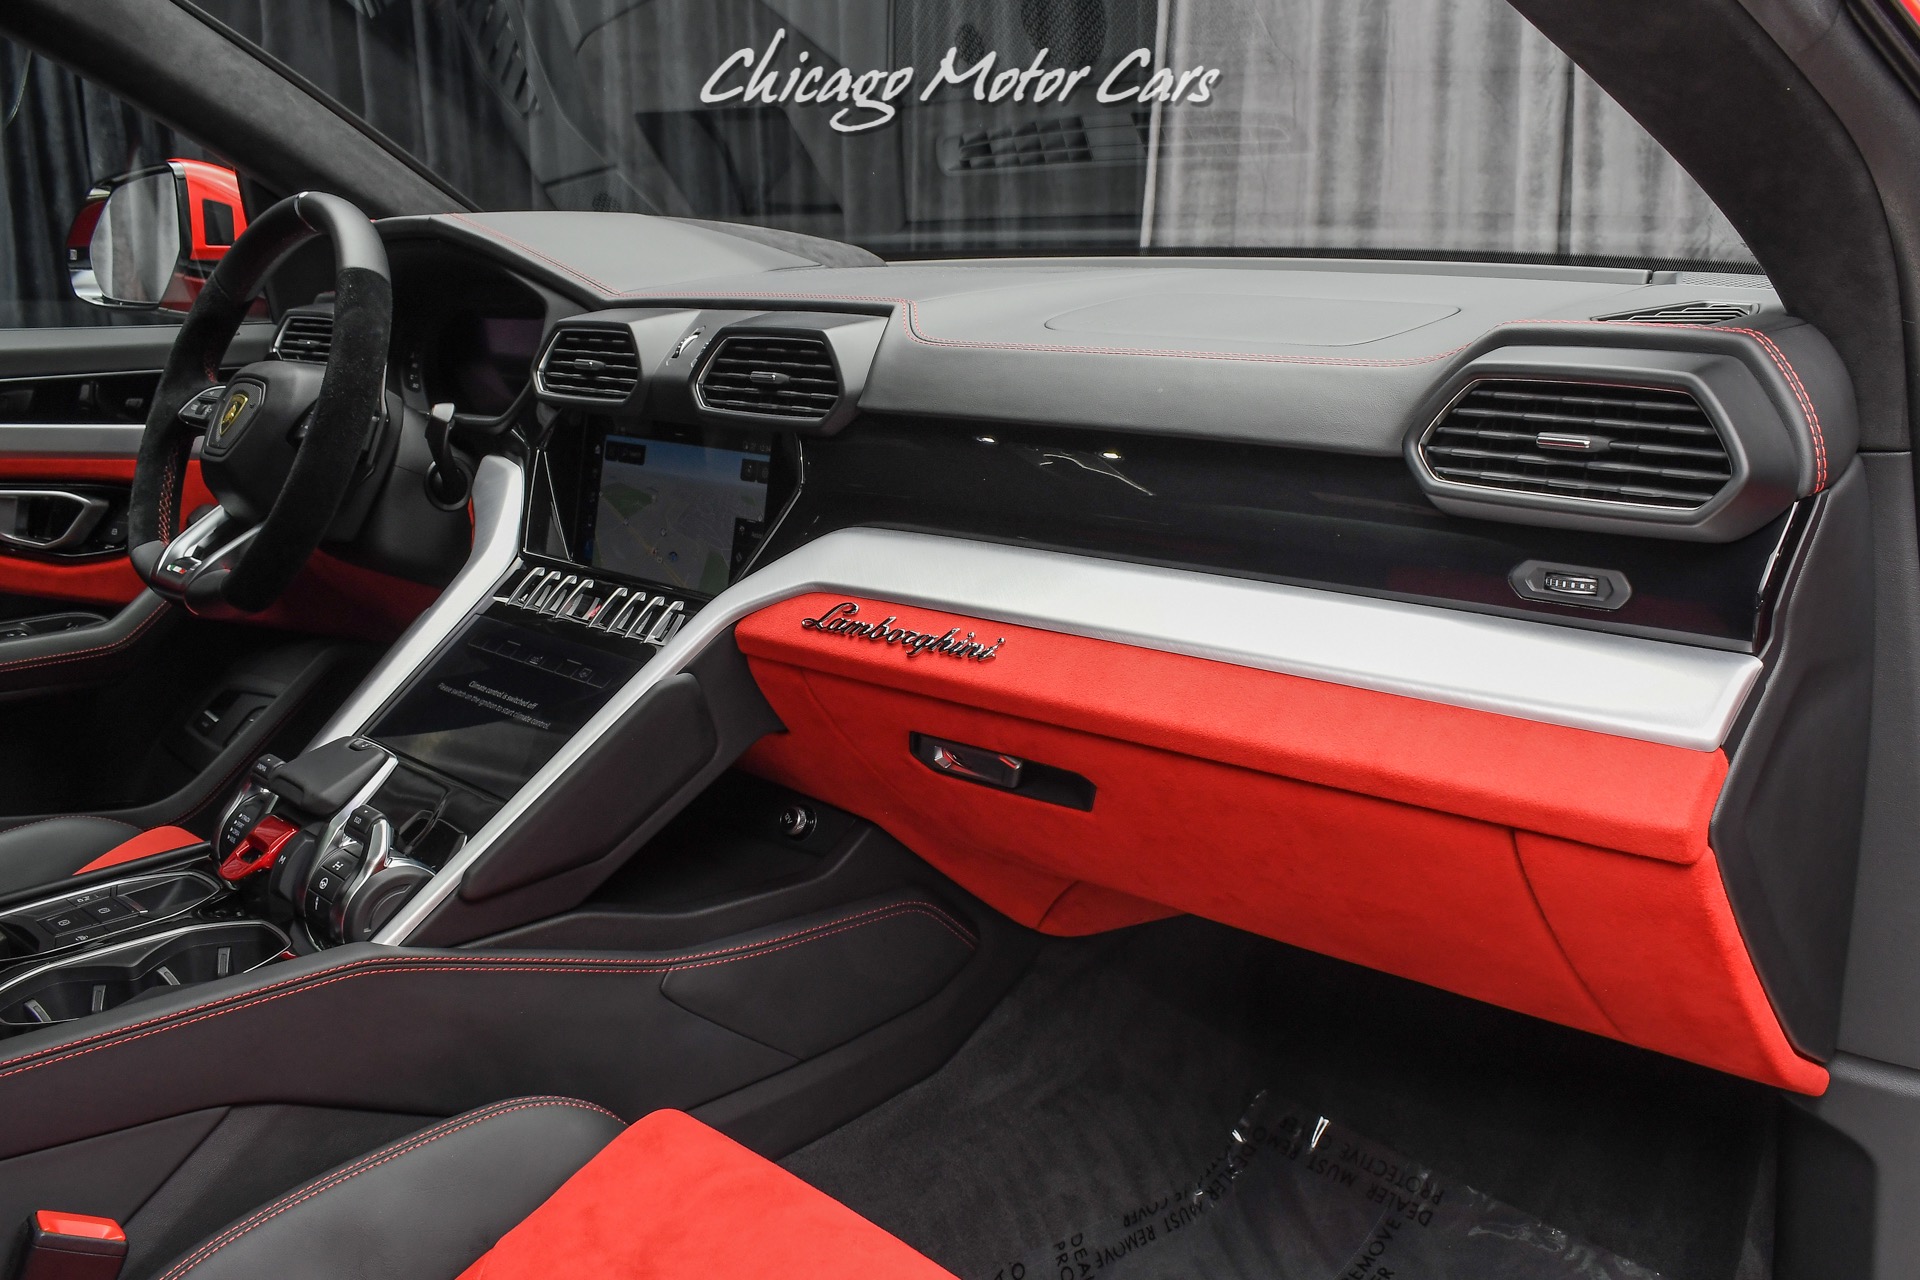 Used 2020 Lamborghini Urus Panoramic Glass Roof! HOT Red/Red Color Combo!  Full ADAS Package! For Sale (Special Pricing) | Chicago Motor Cars Stock  #17601